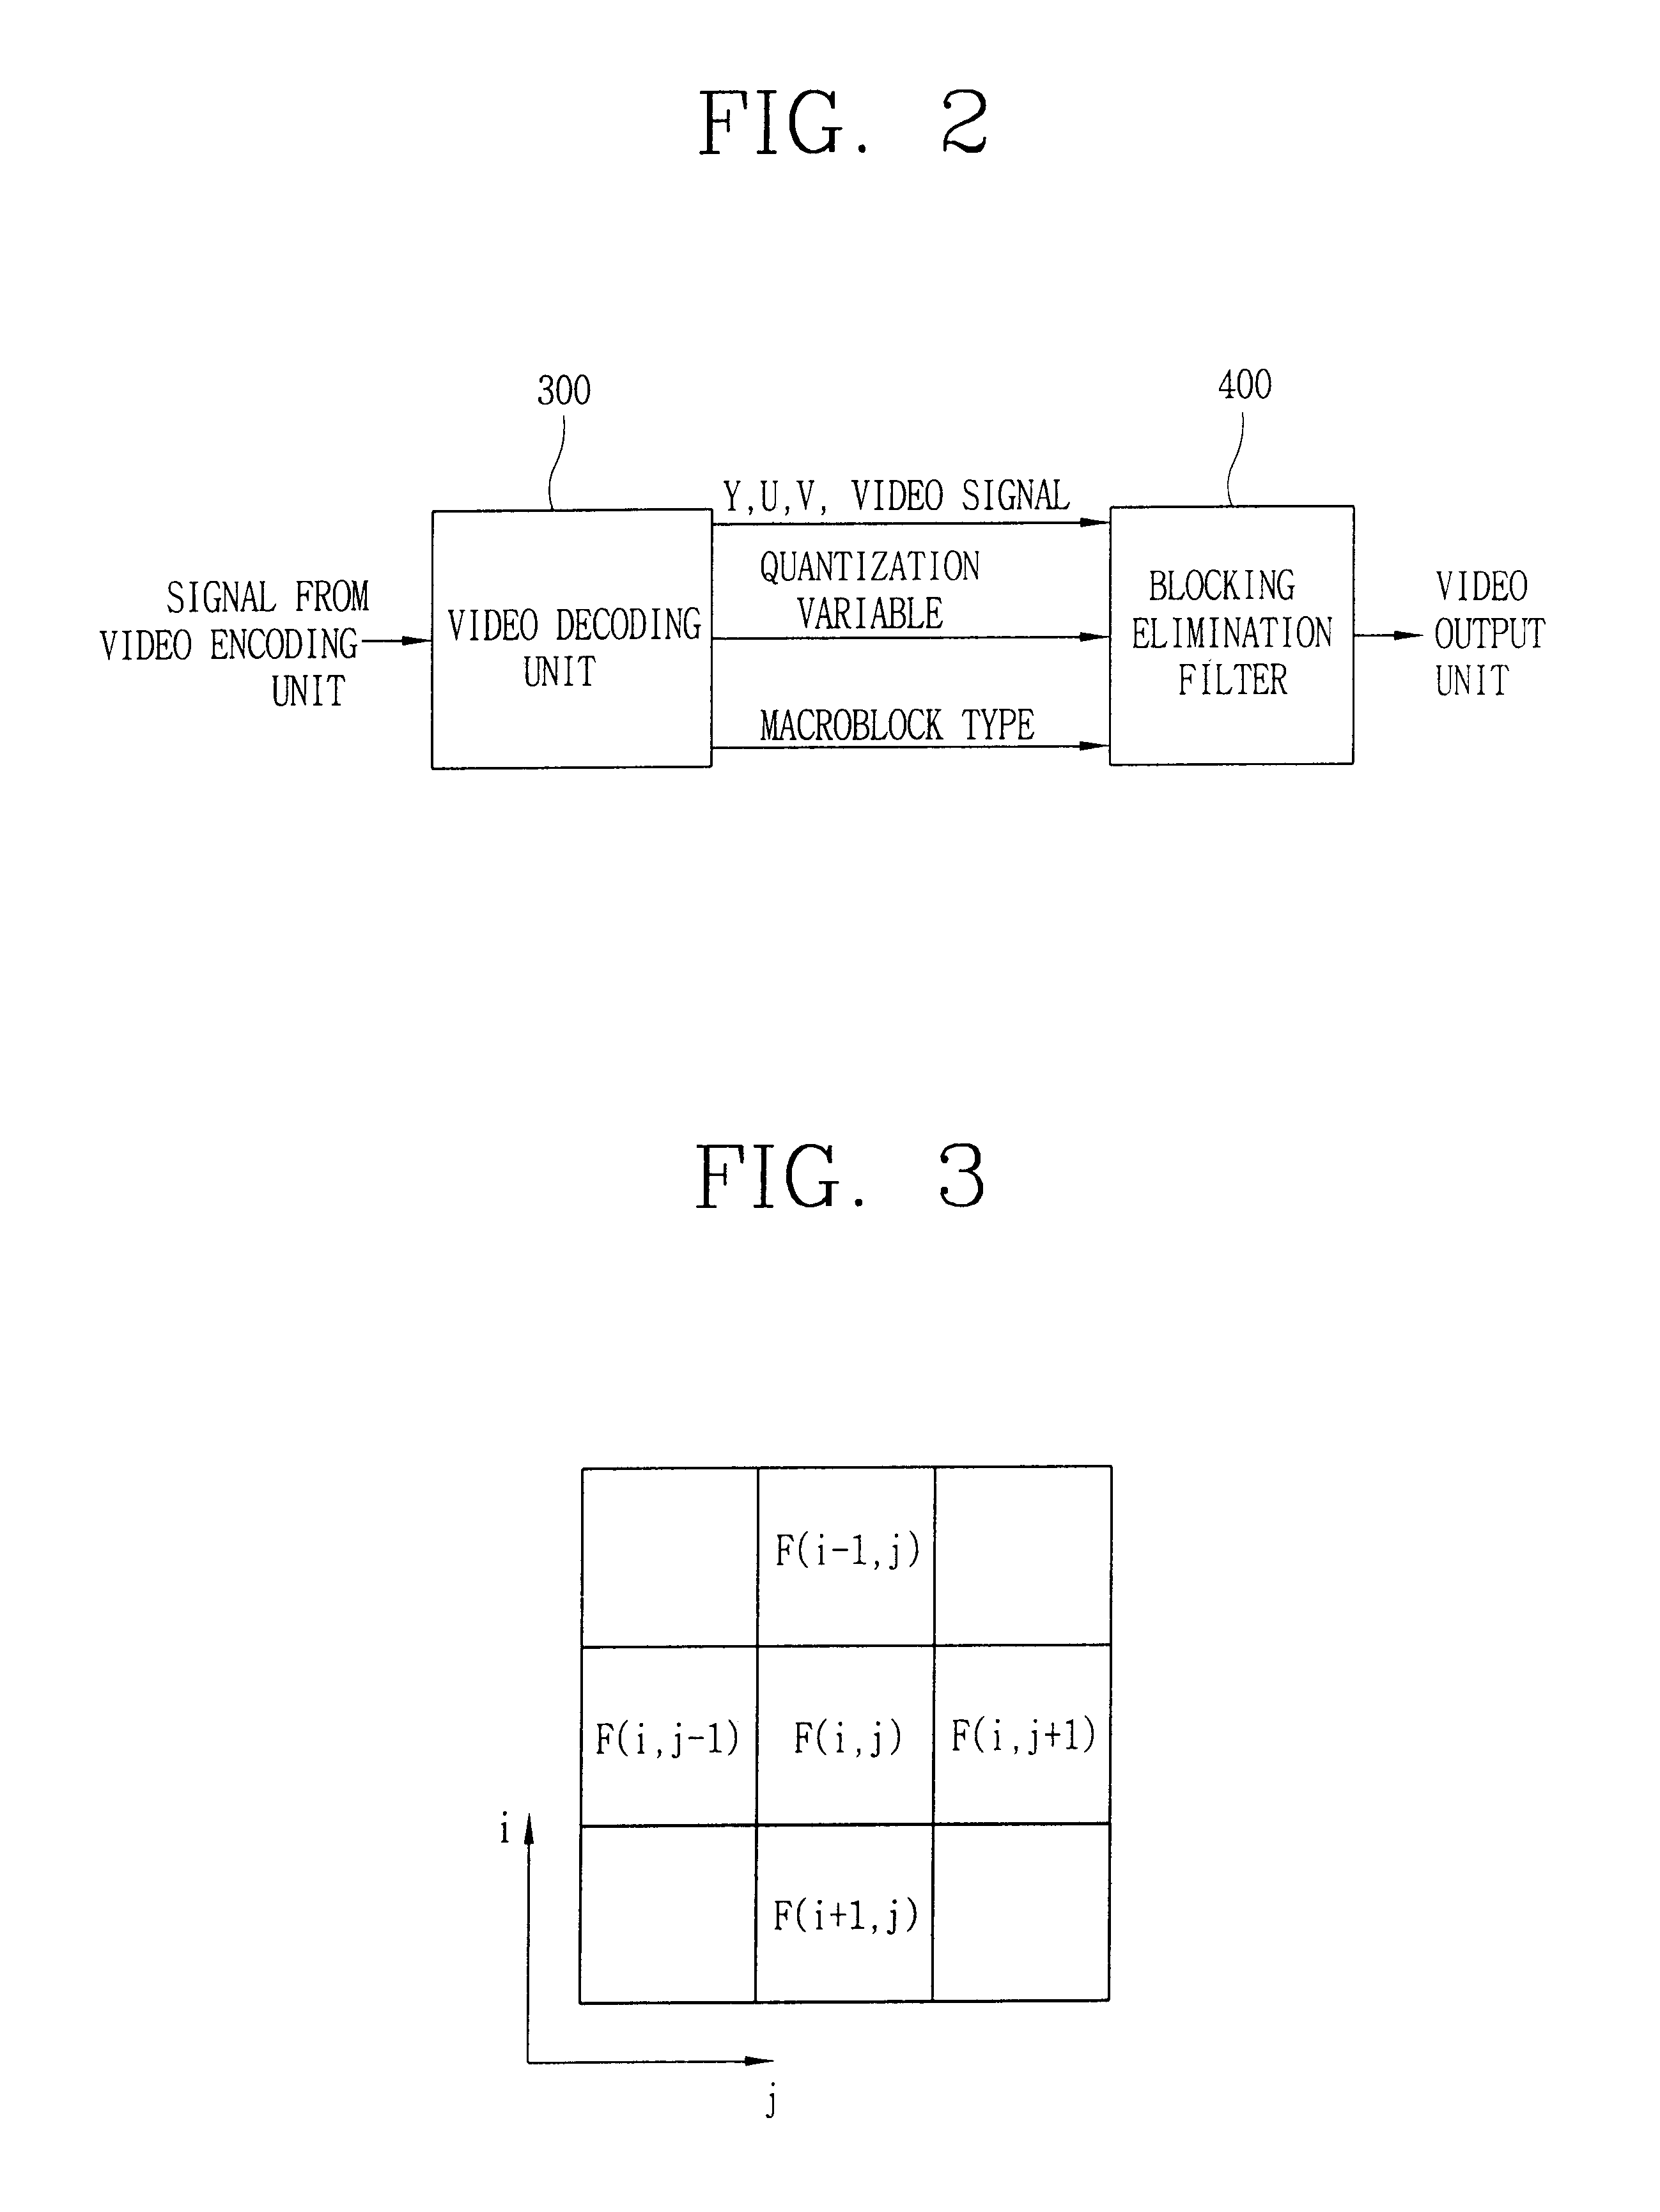 Method for eliminating blocking effect in compressed video signal